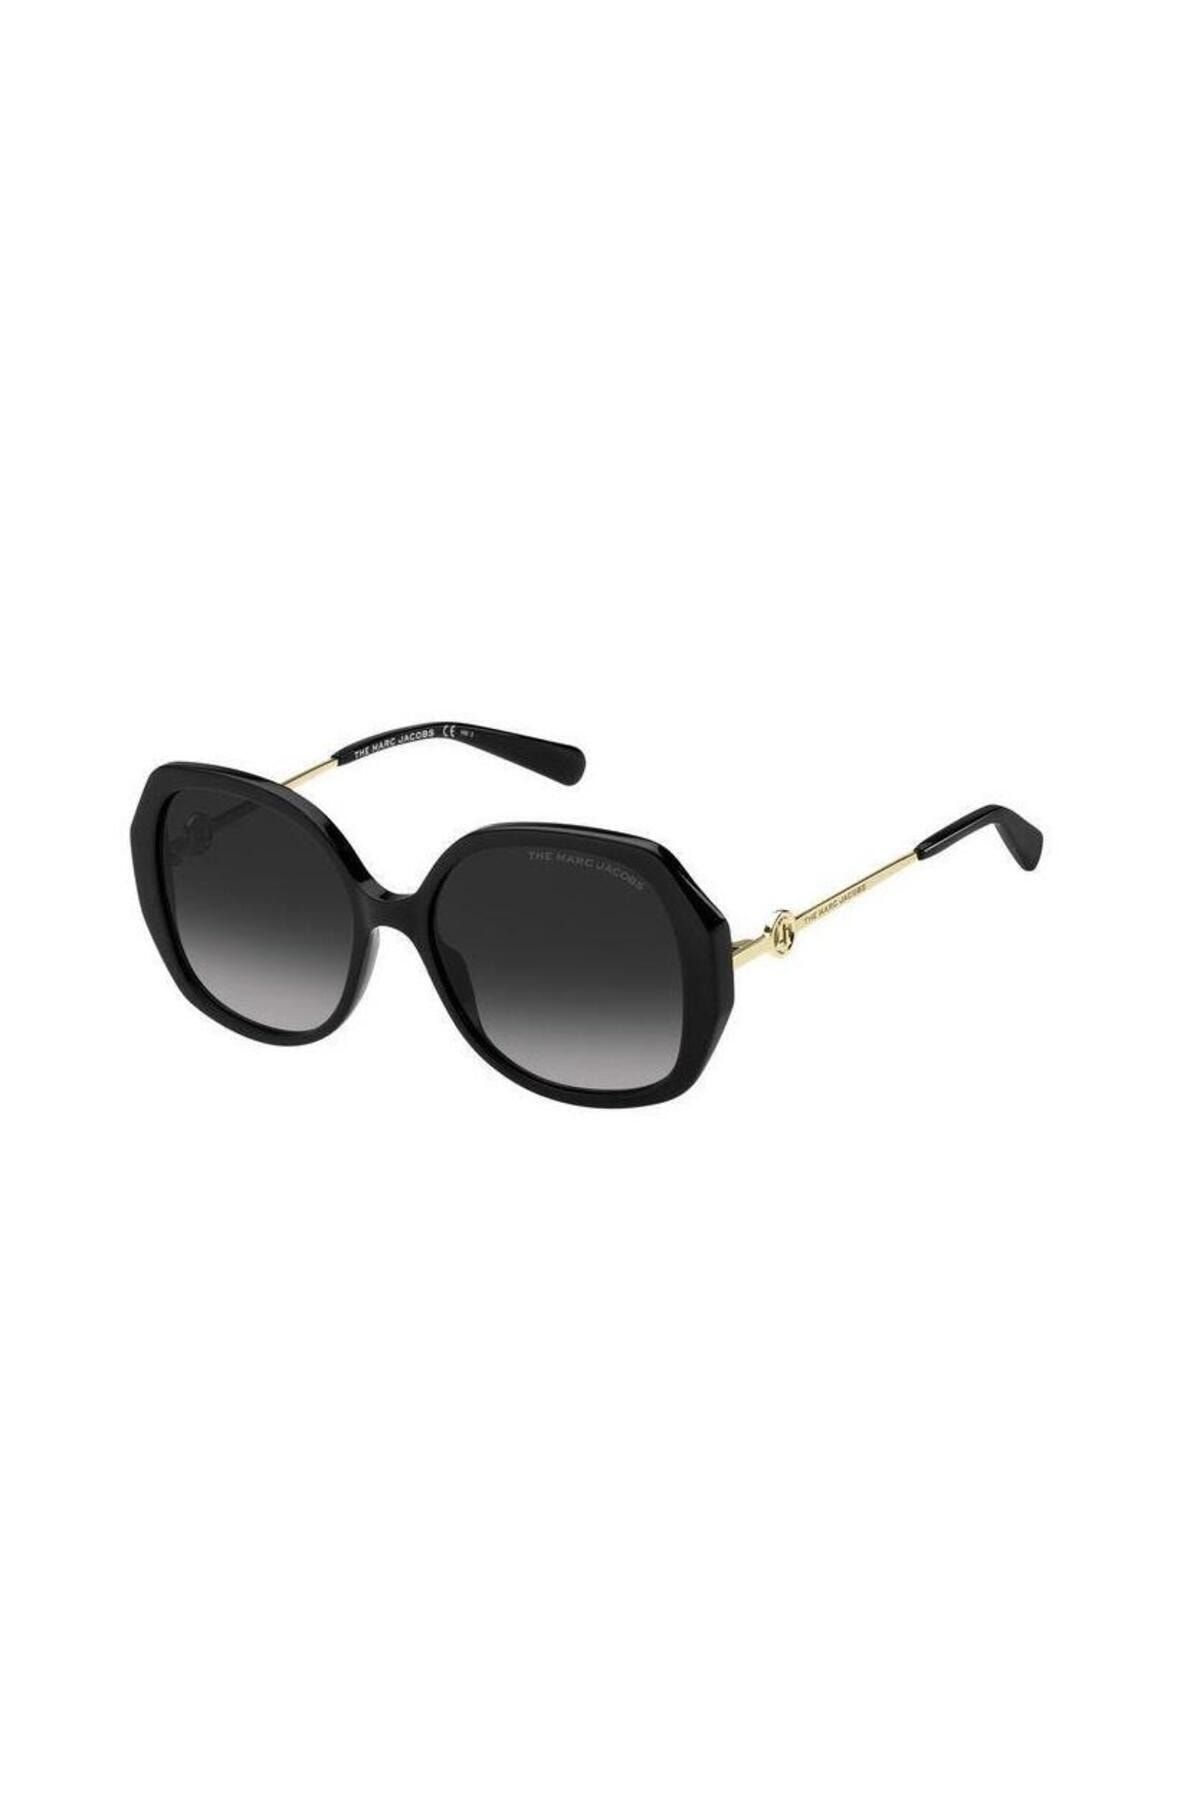 Marc Jacobs MARC 581/S 8079O